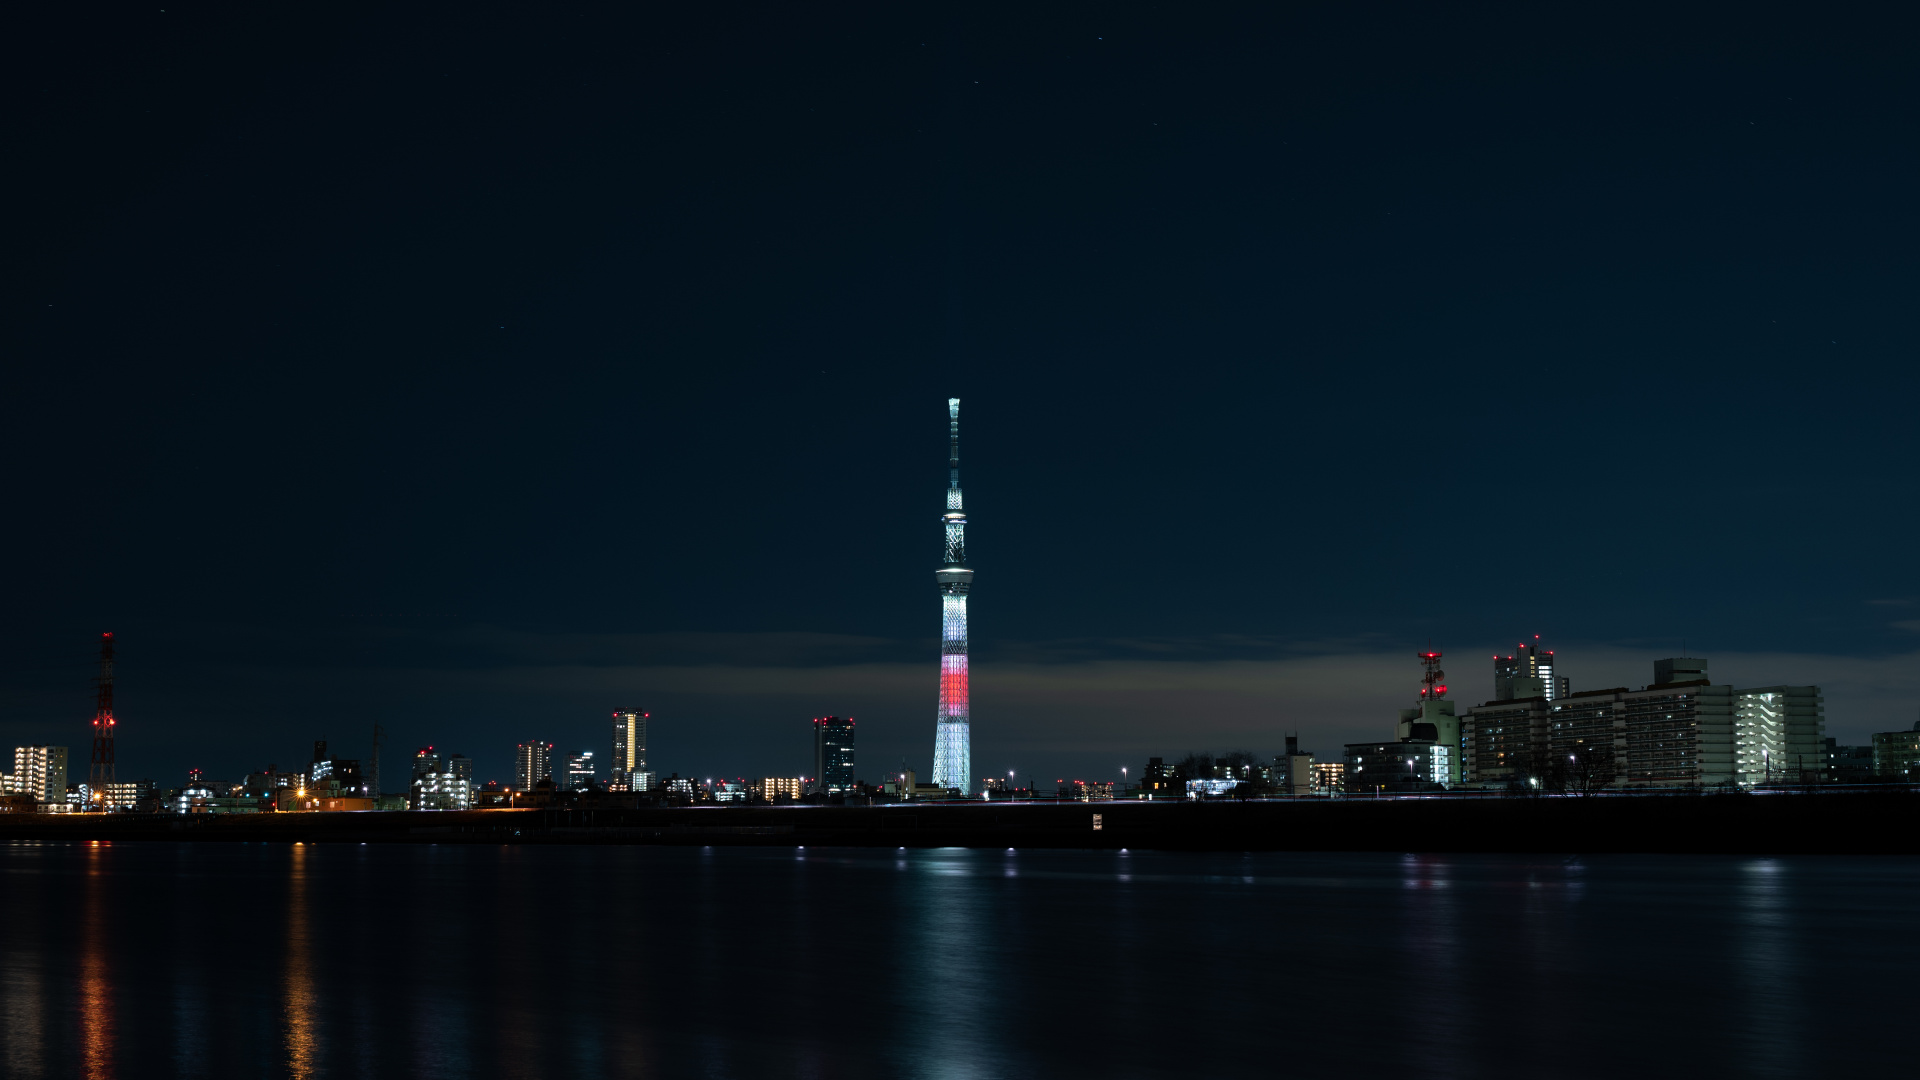 White and Red Tower Near Body of Water During Night Time. Wallpaper in 1920x1080 Resolution